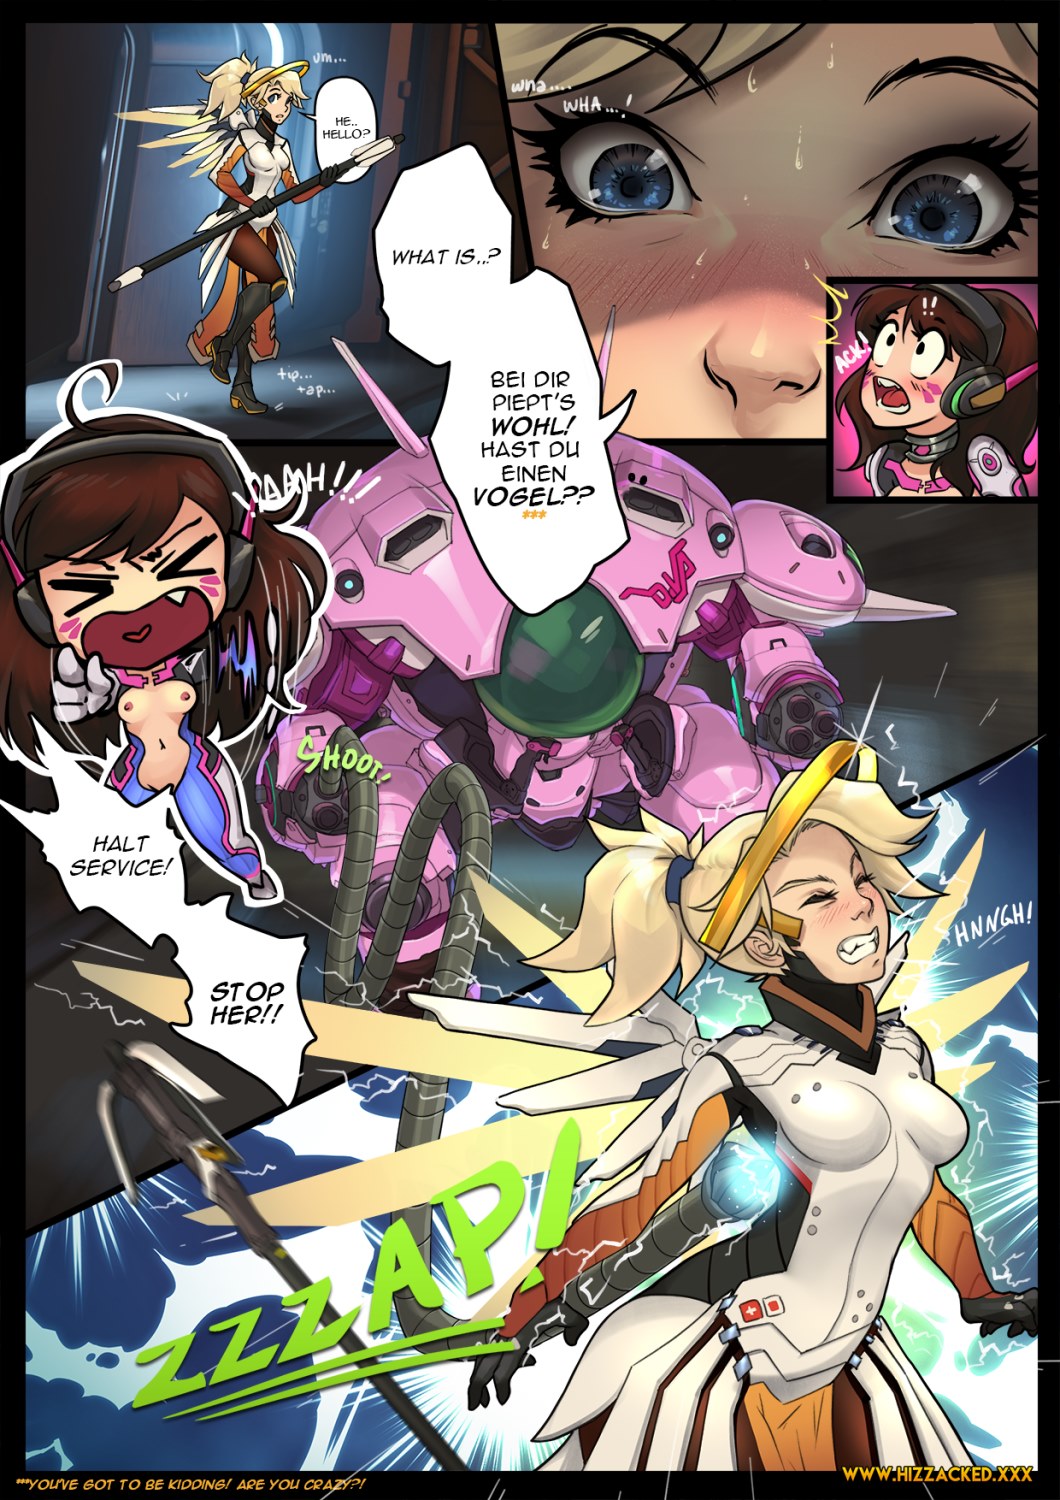 súng this! (overwatch)